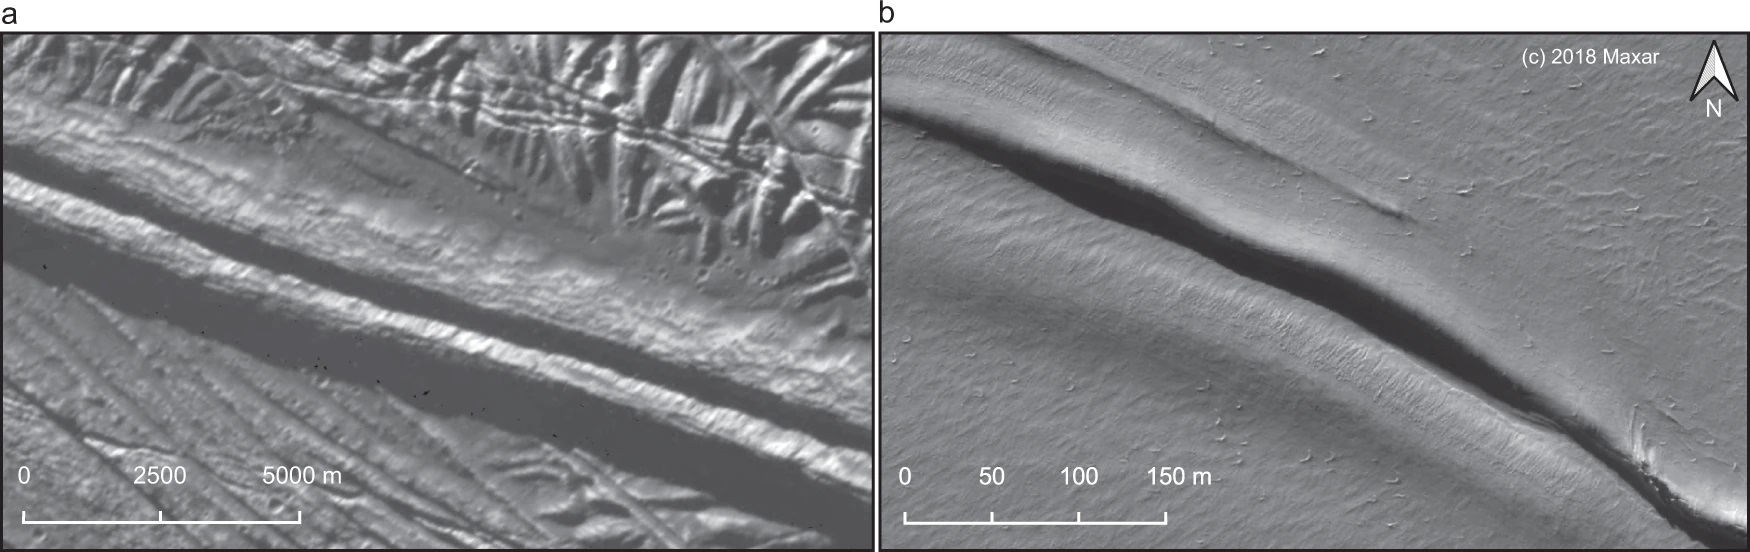 a) Double ridge on Europa, photographed by the Galileo station. Image resolution is 20 m/pixel, b) double ridge in Greenland, photographed by WorldView-3 satellite. The image resolution is 0.31 m/pixel. Credit: Riley Culberg et al. / Nature Communications, 2022